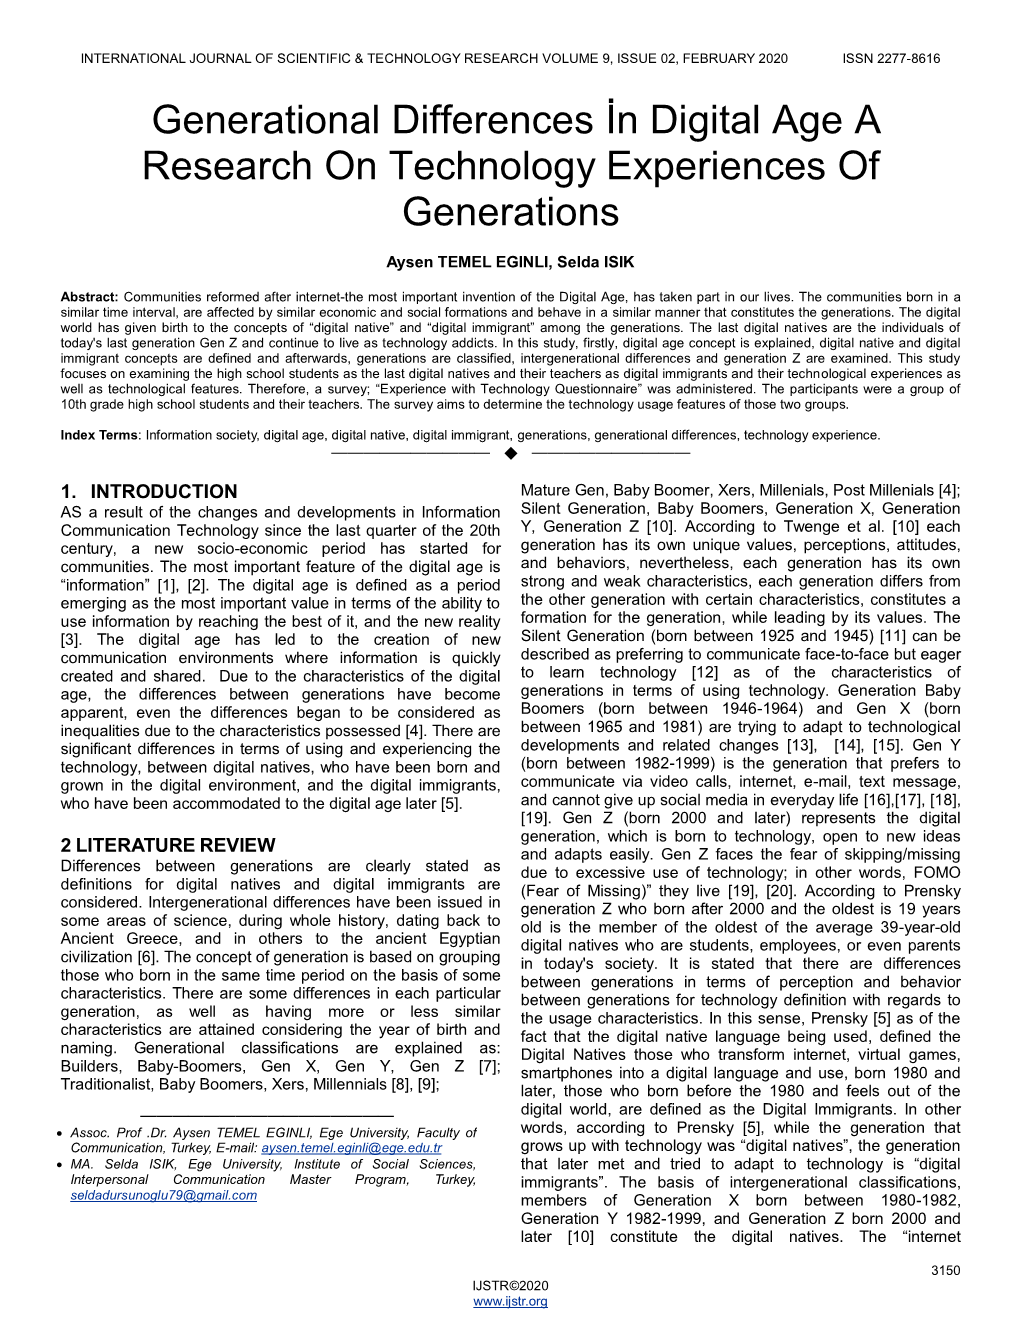 Generational Differences İn Digital Age a Research on Technology Experiences of Generations